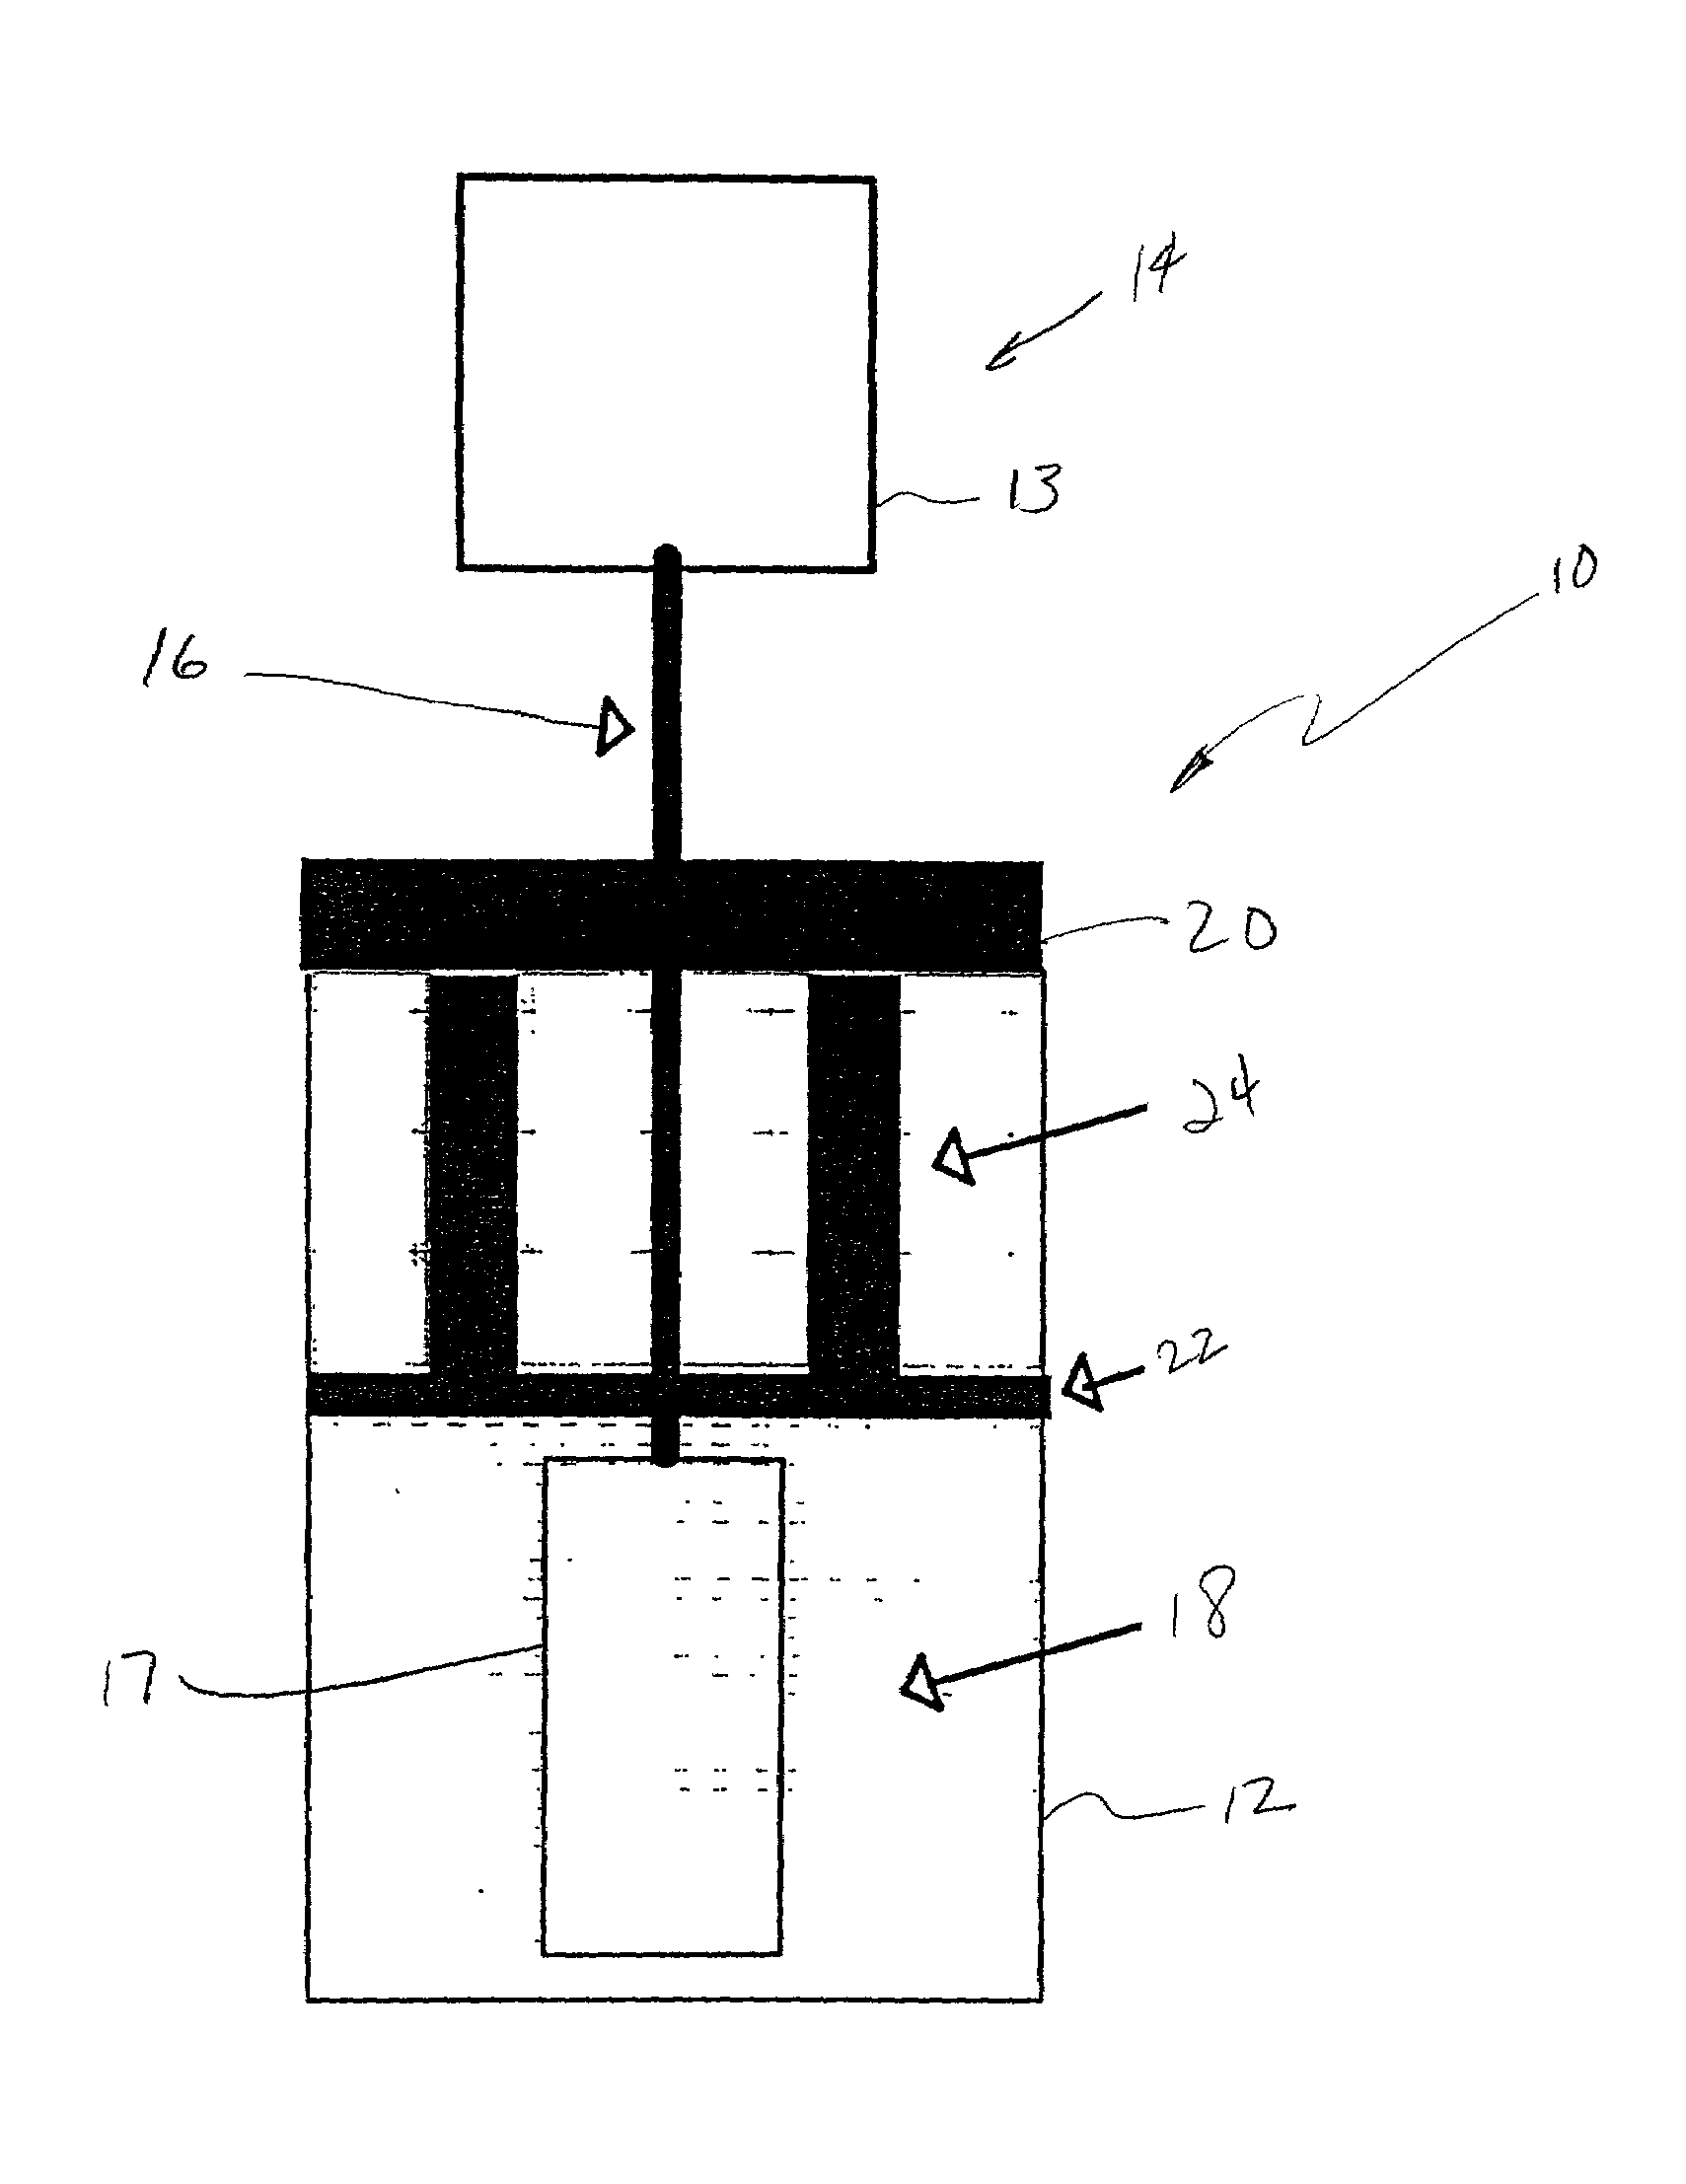 Biocompatible tissue for therapeutic use and method of making same